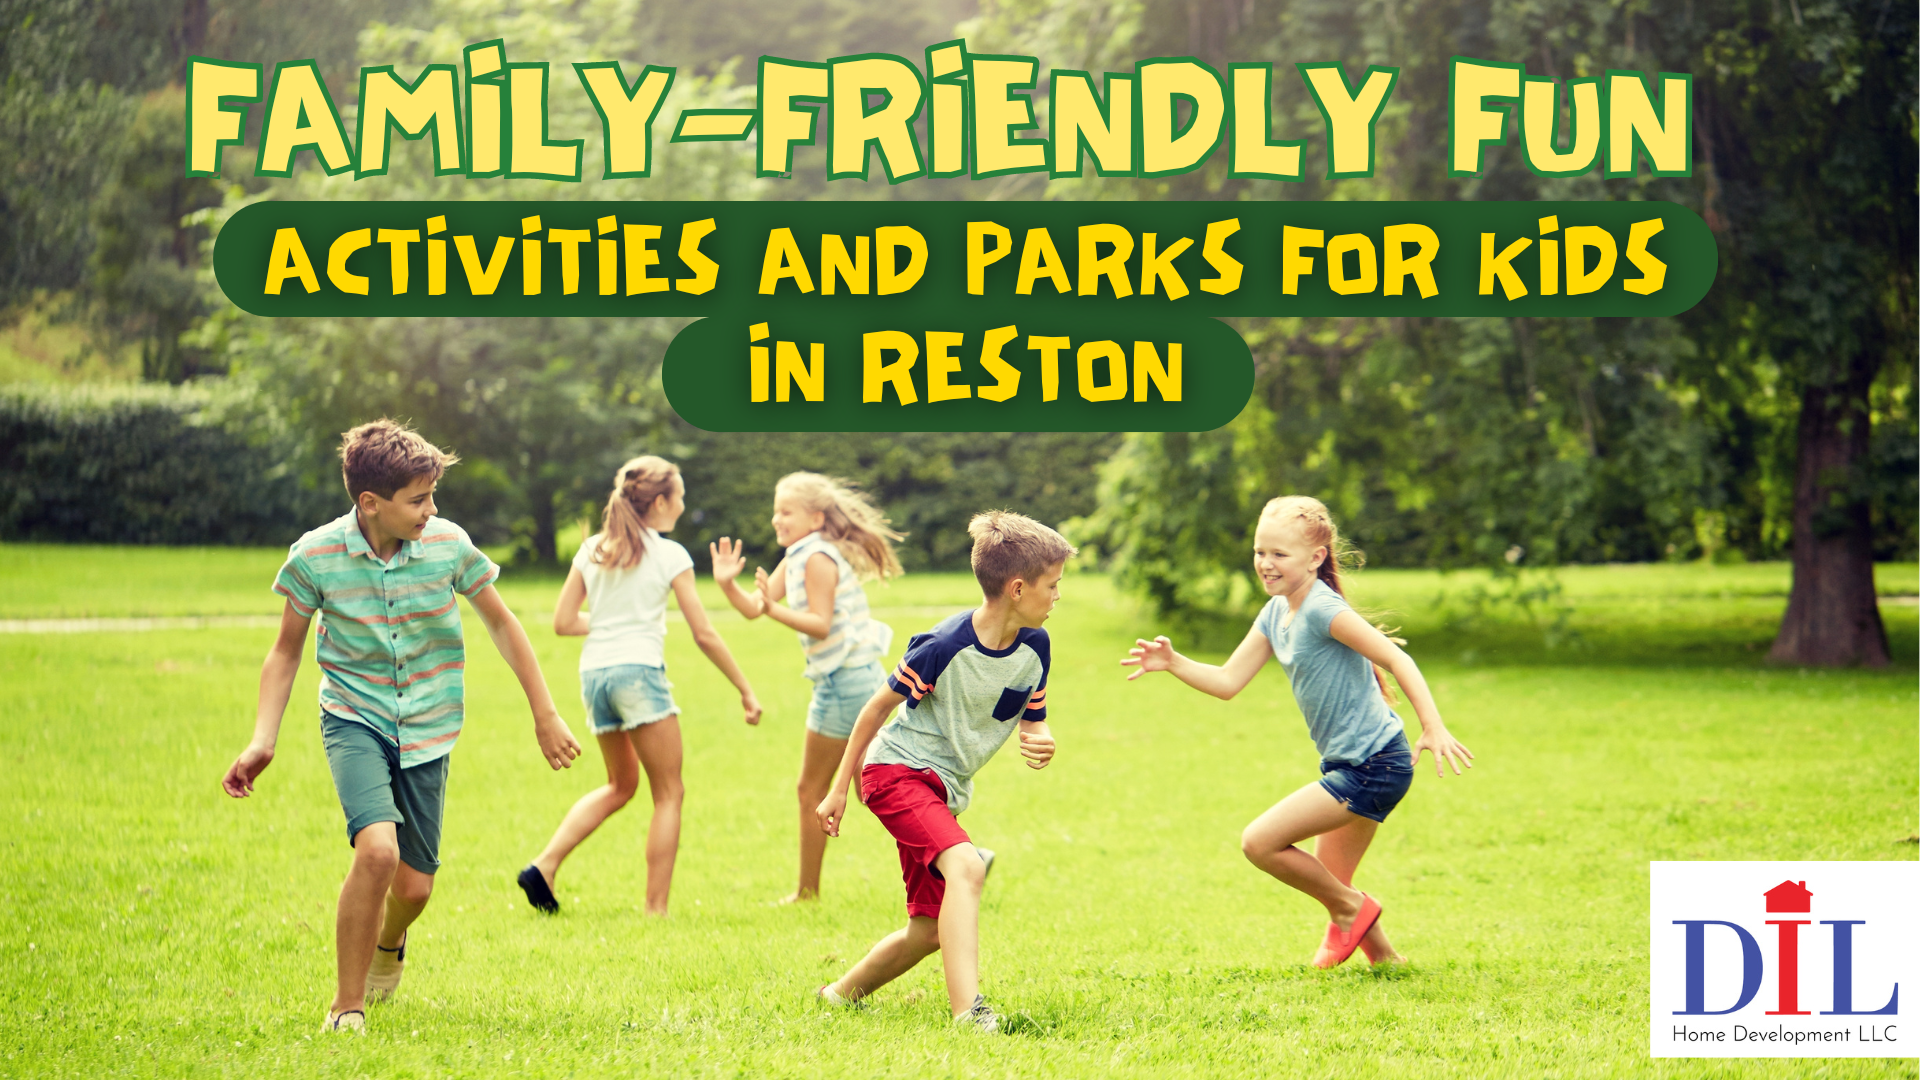 Family-Friendly Fun: Activities and Parks for Kids in Reston